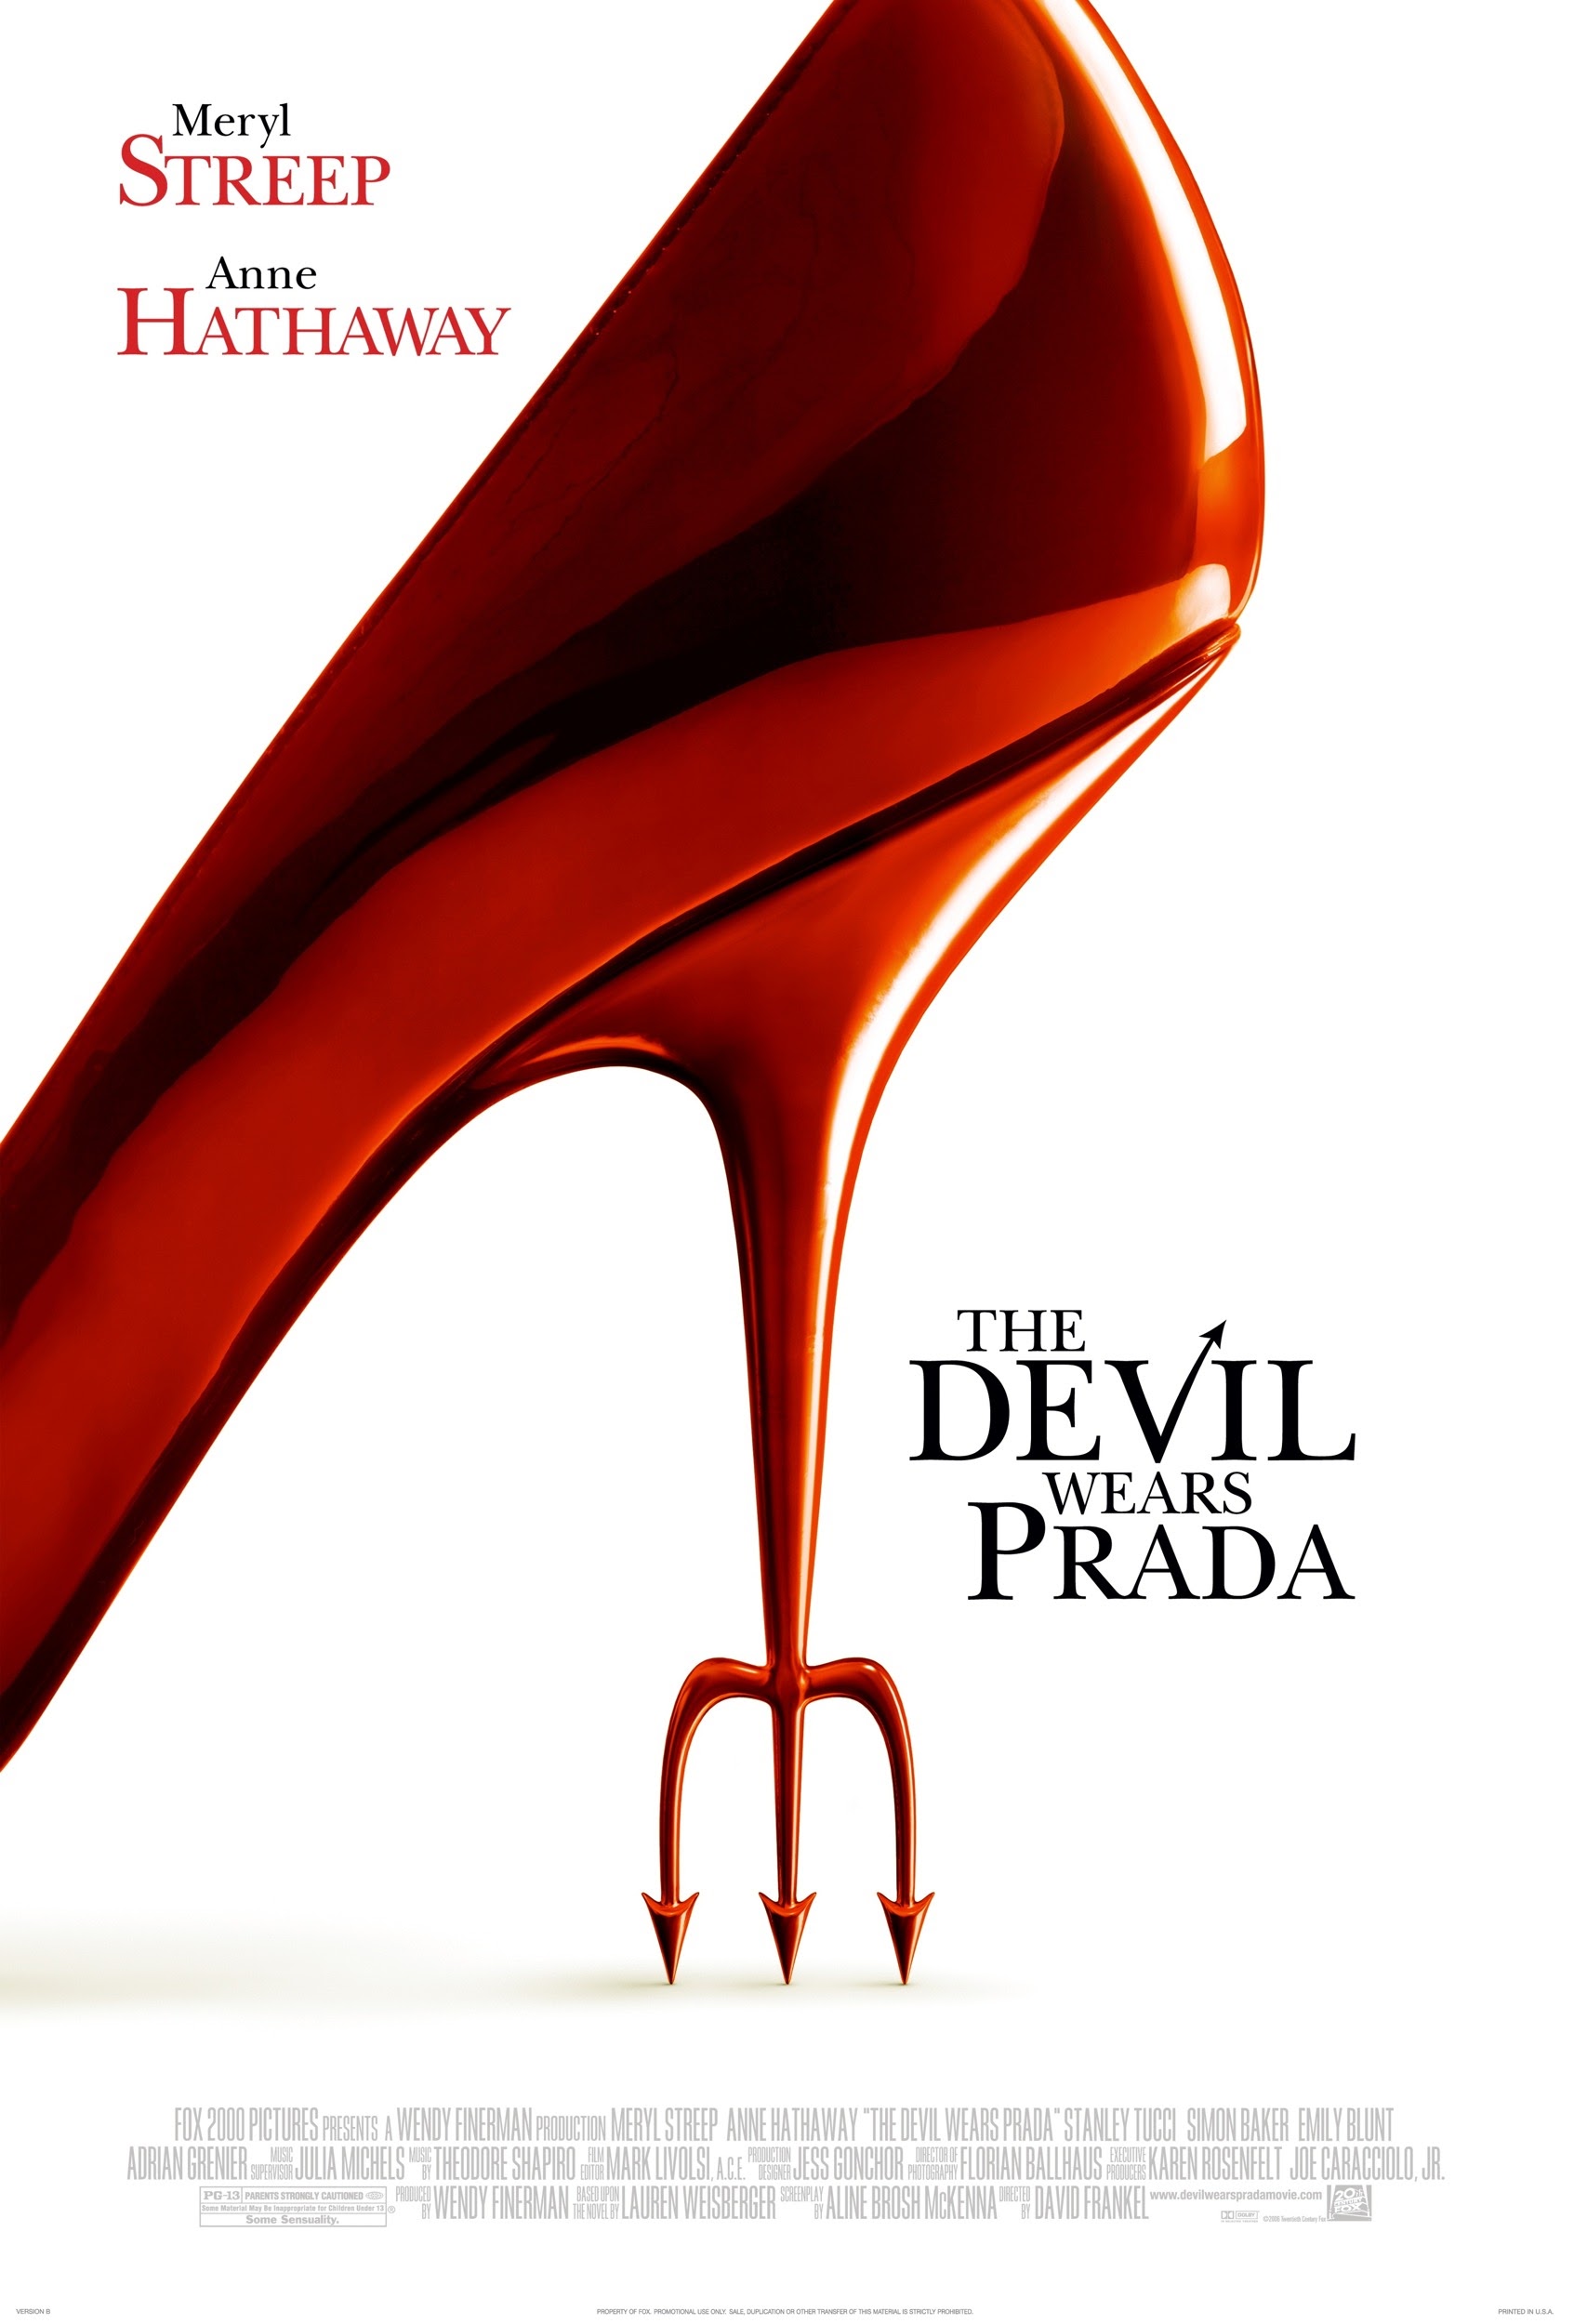 25 Times ​The Devil Wears Prada​ Proved the First Job Struggle Is Real